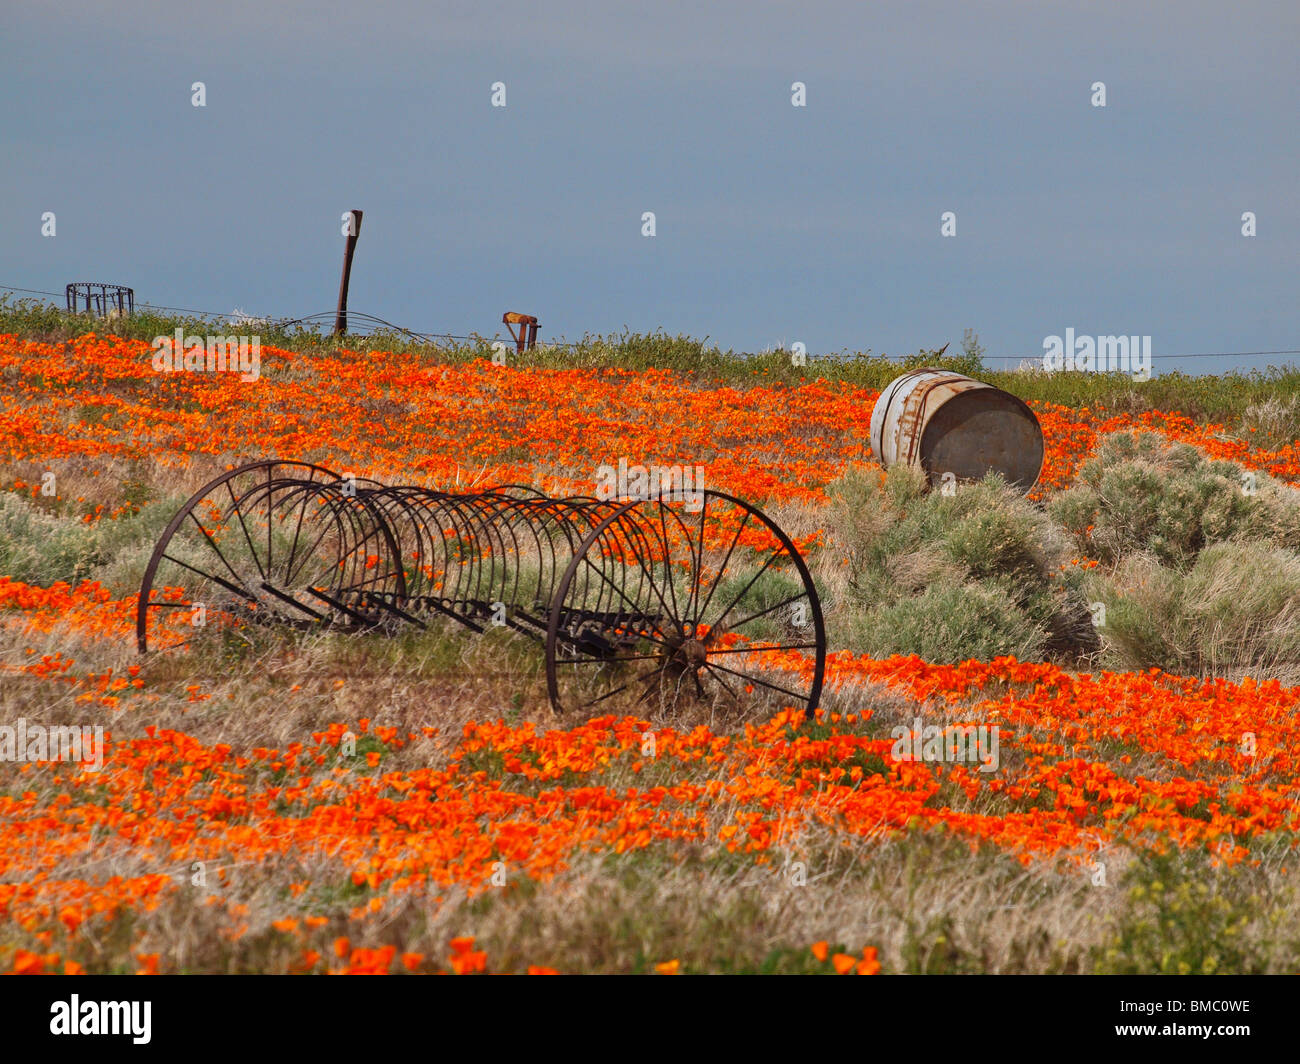 Old farm equipment lie rusting in a field of wildflowers. Stock Photo